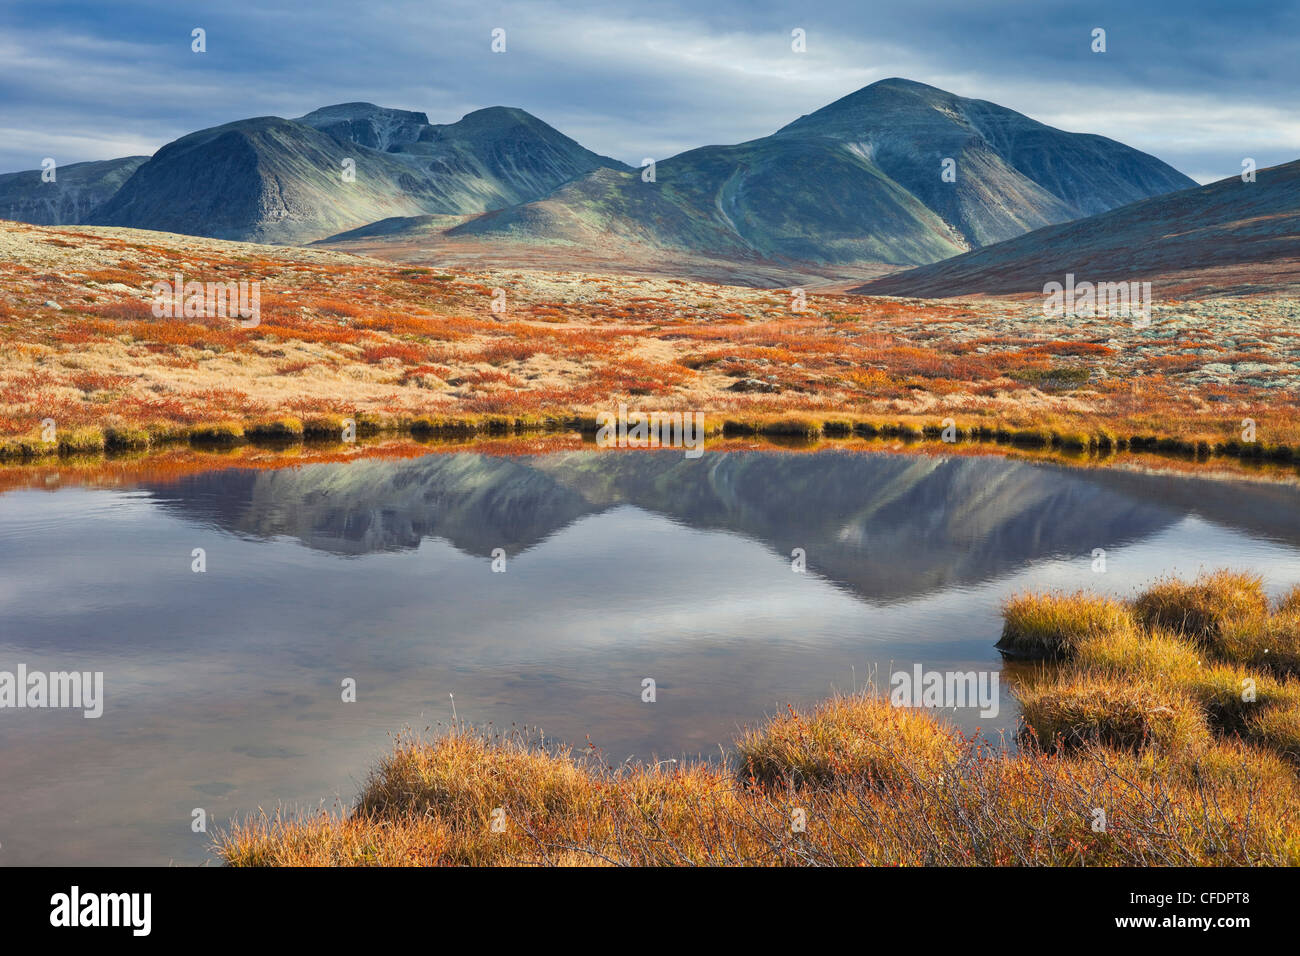 Reflection of Rondslottet mountain in a lake, Rondane National Park, Norway, Europe Stock Photo